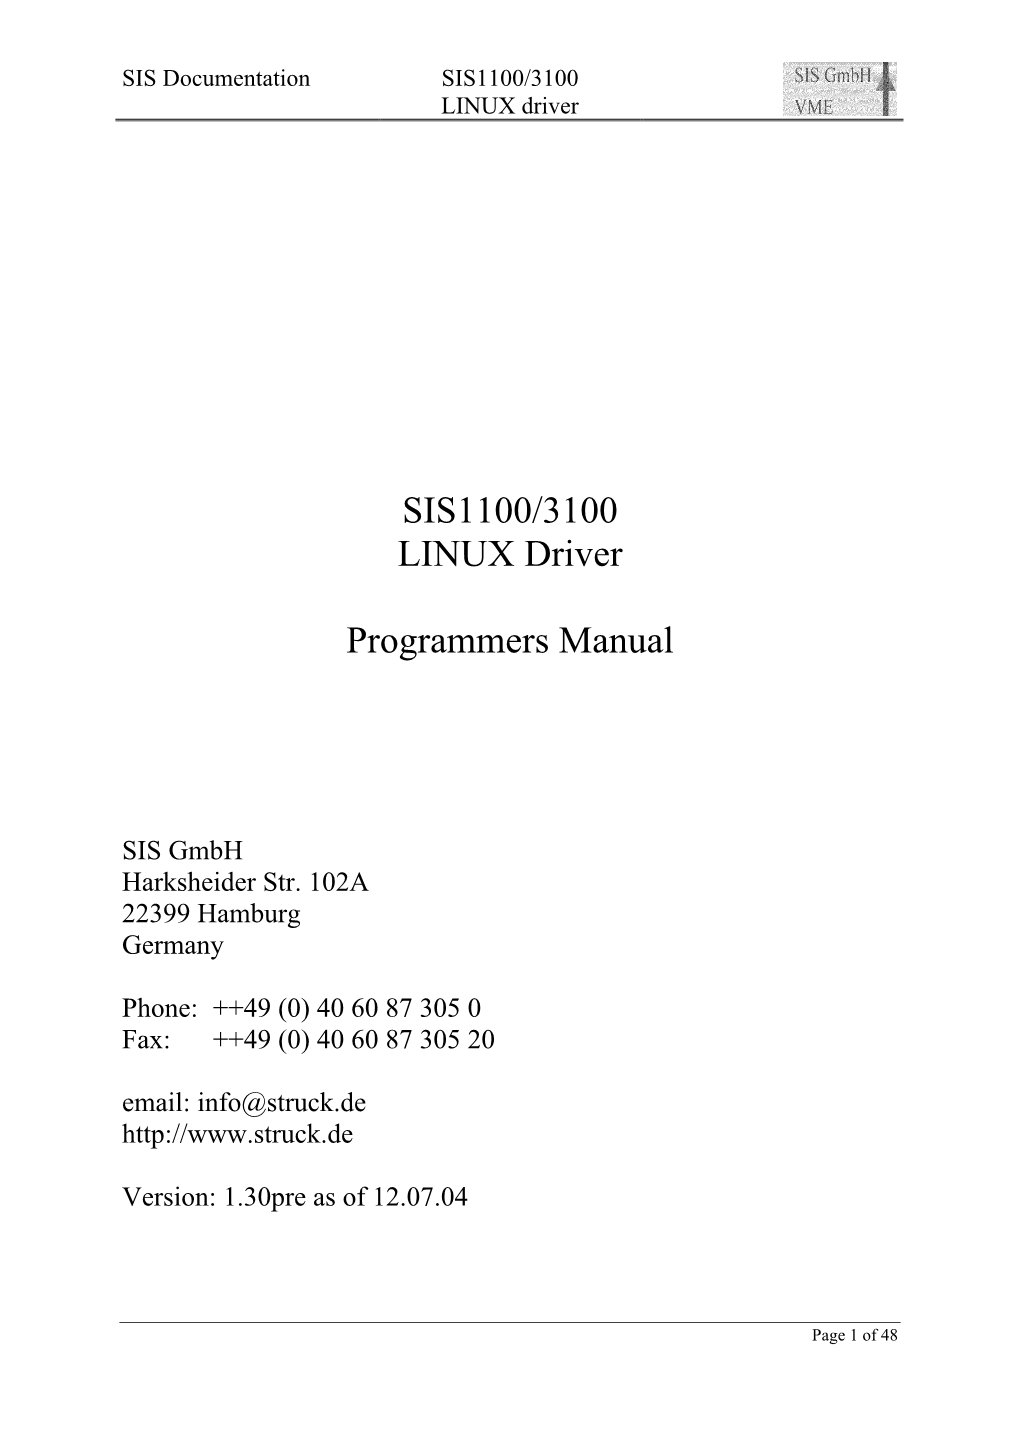 SIS1100/3100 LINUX Driver Programmers Manual